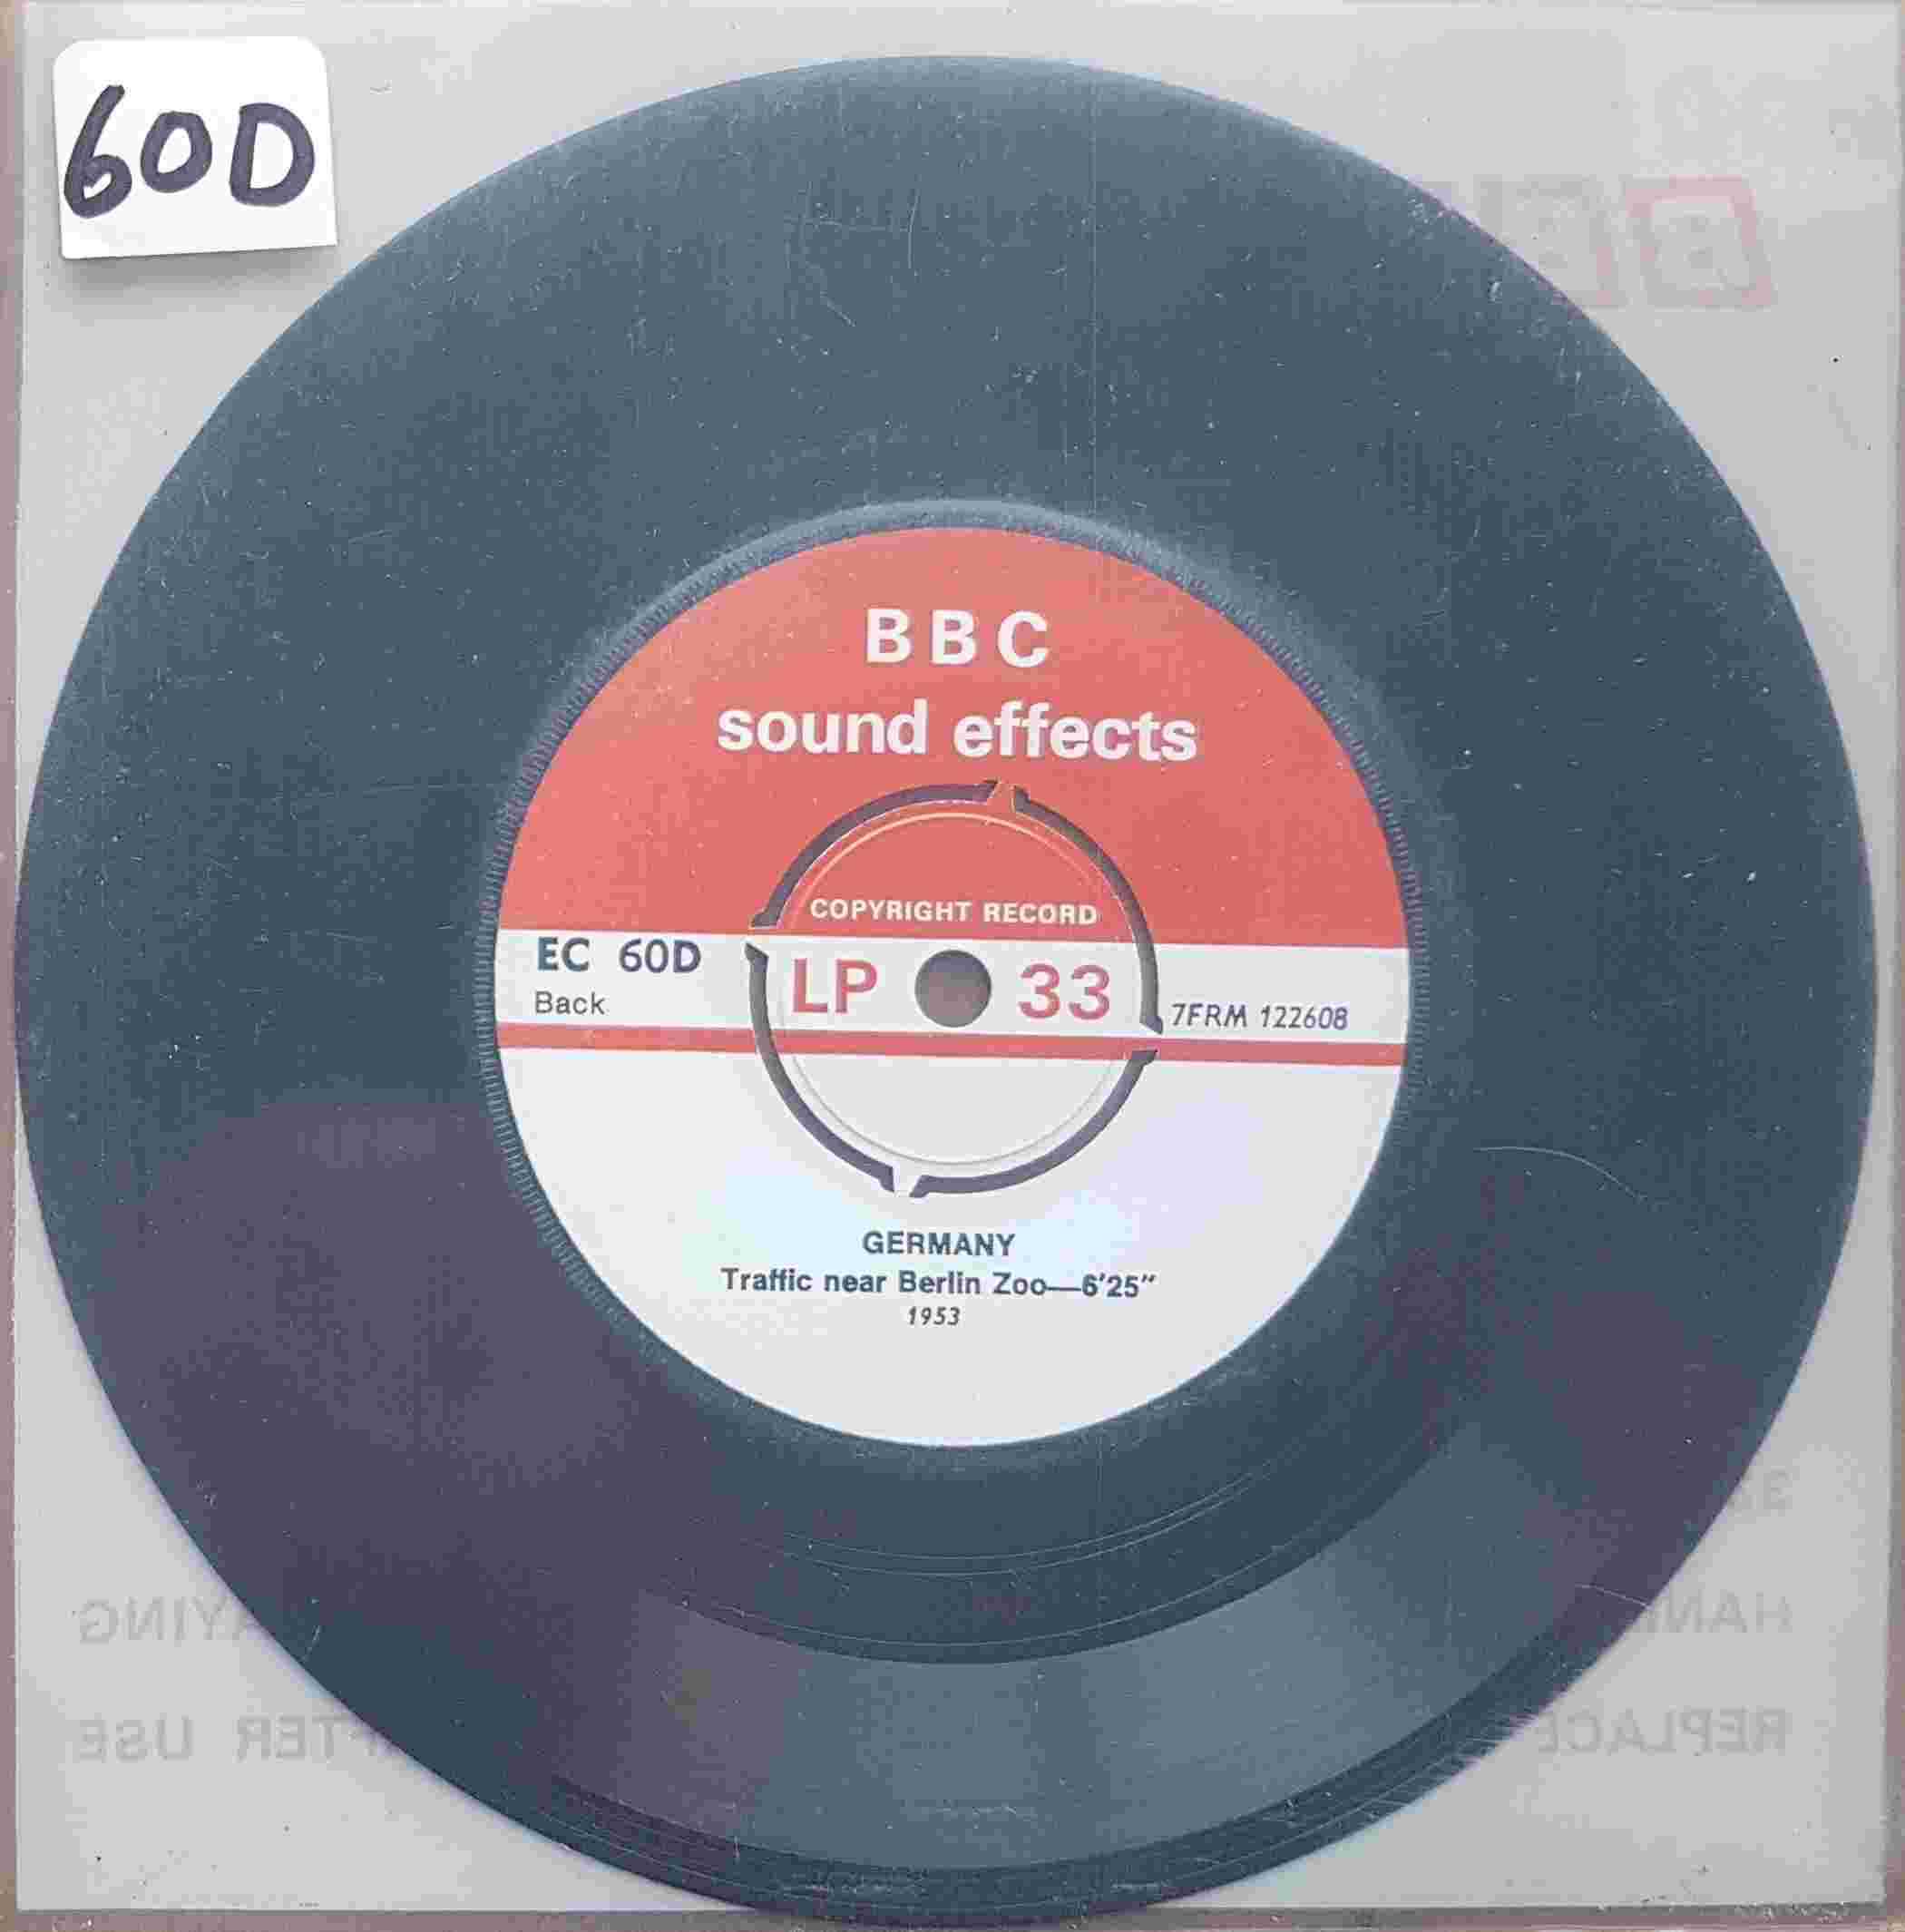 Picture of EC 60D Germany by artist Not registered from the BBC records and Tapes library